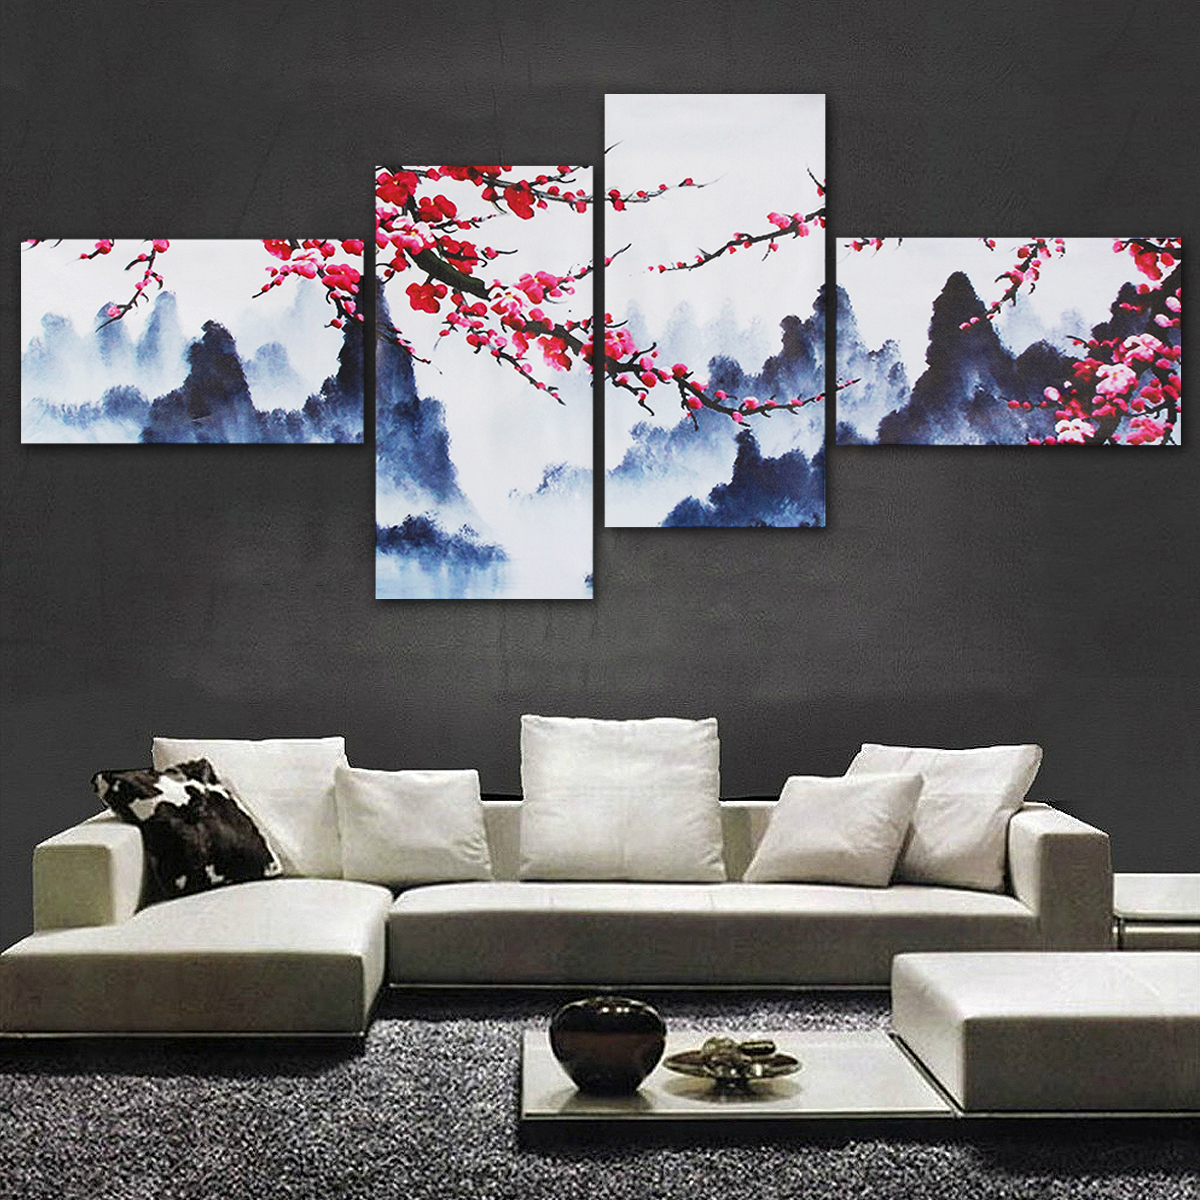 4-Pcs-Wall-Decorative-Painting-Modern-Abstract-Wall-Decor-Plum-Blossom-Art-Pictures-Canvas-Prints-Ho-1319561-4